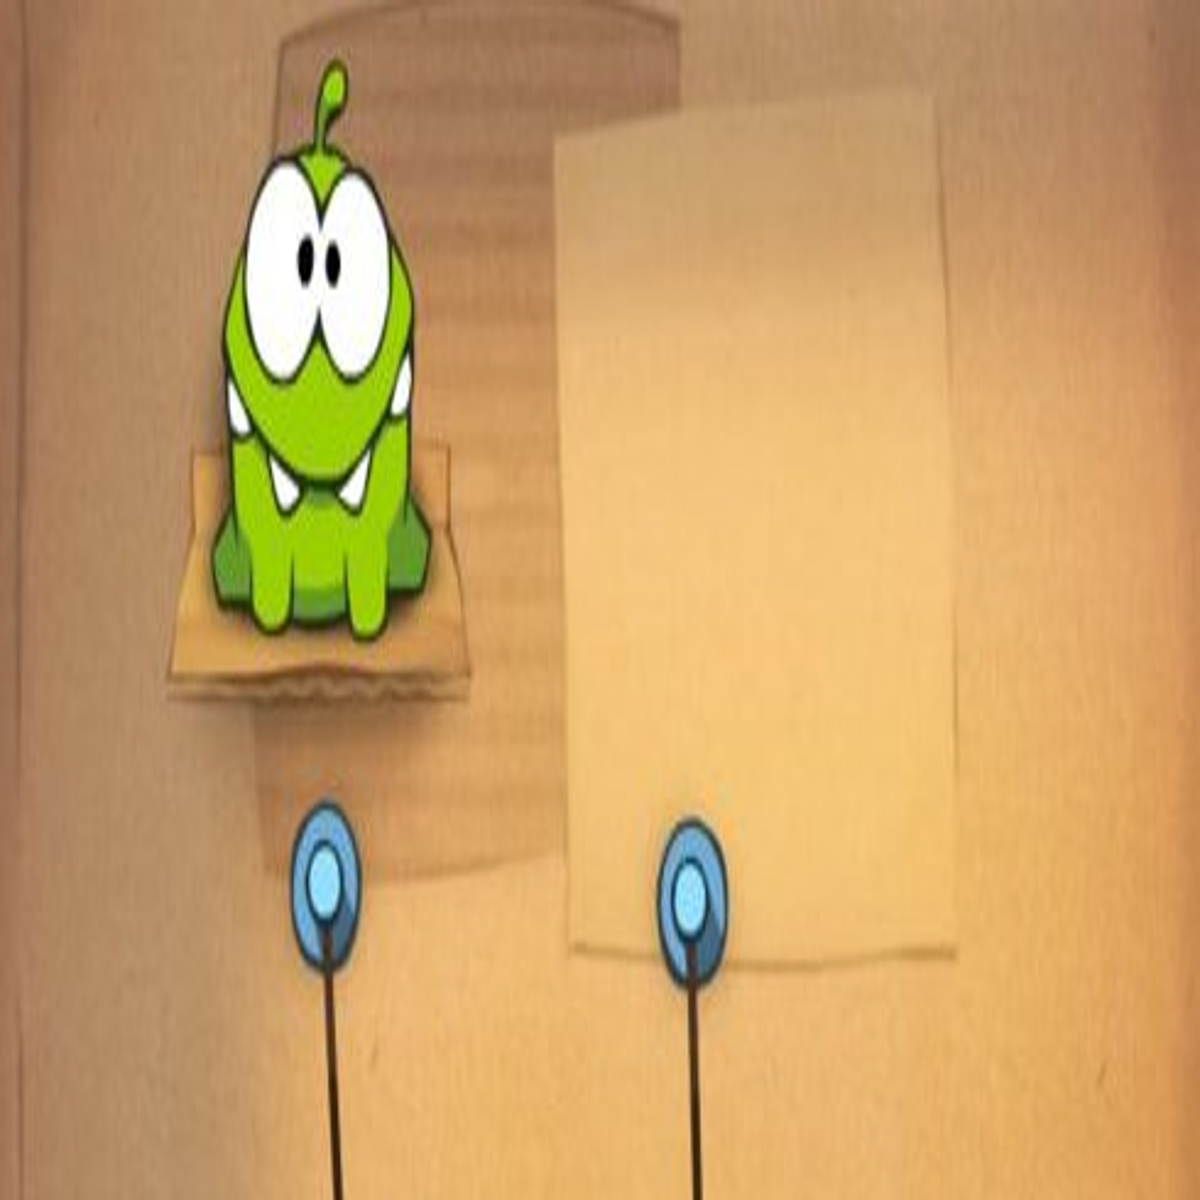 Chillingo's Newest Puzzle Game, 'CUT THE ROPE' now live on the